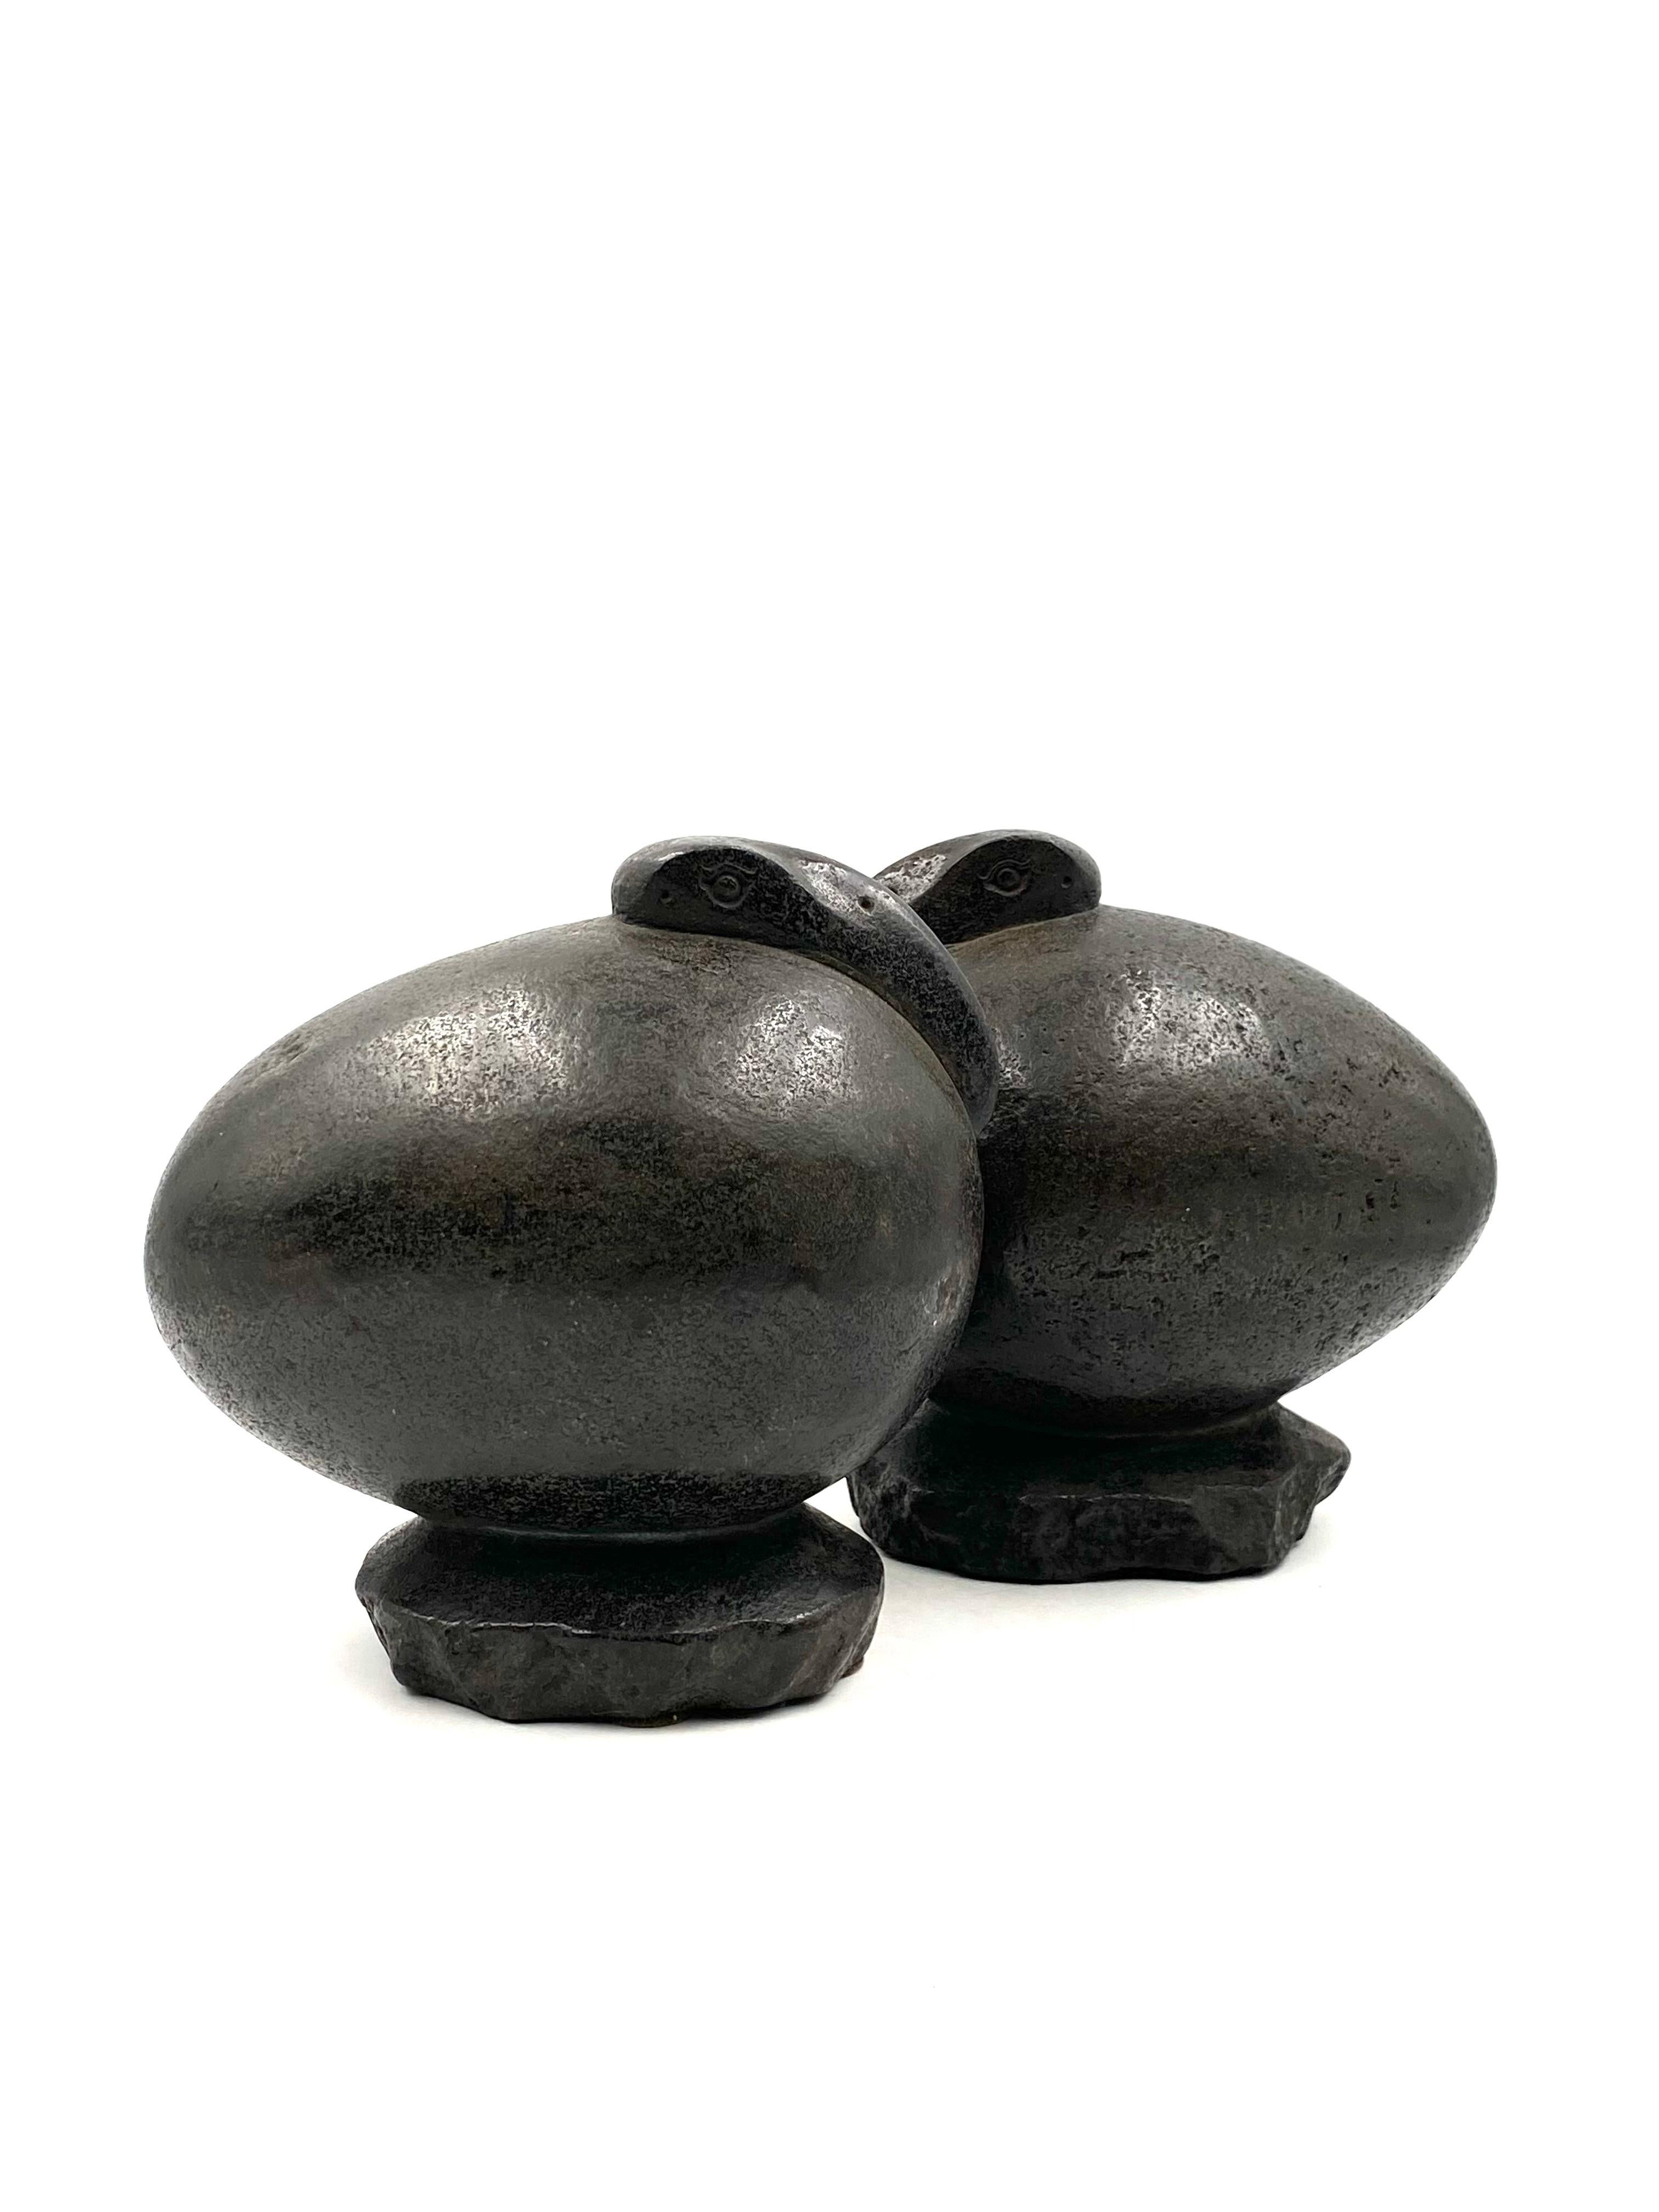 Ibis Birds, Pair of Basalt Ovoid Sculptures, France Early 20th Century 9